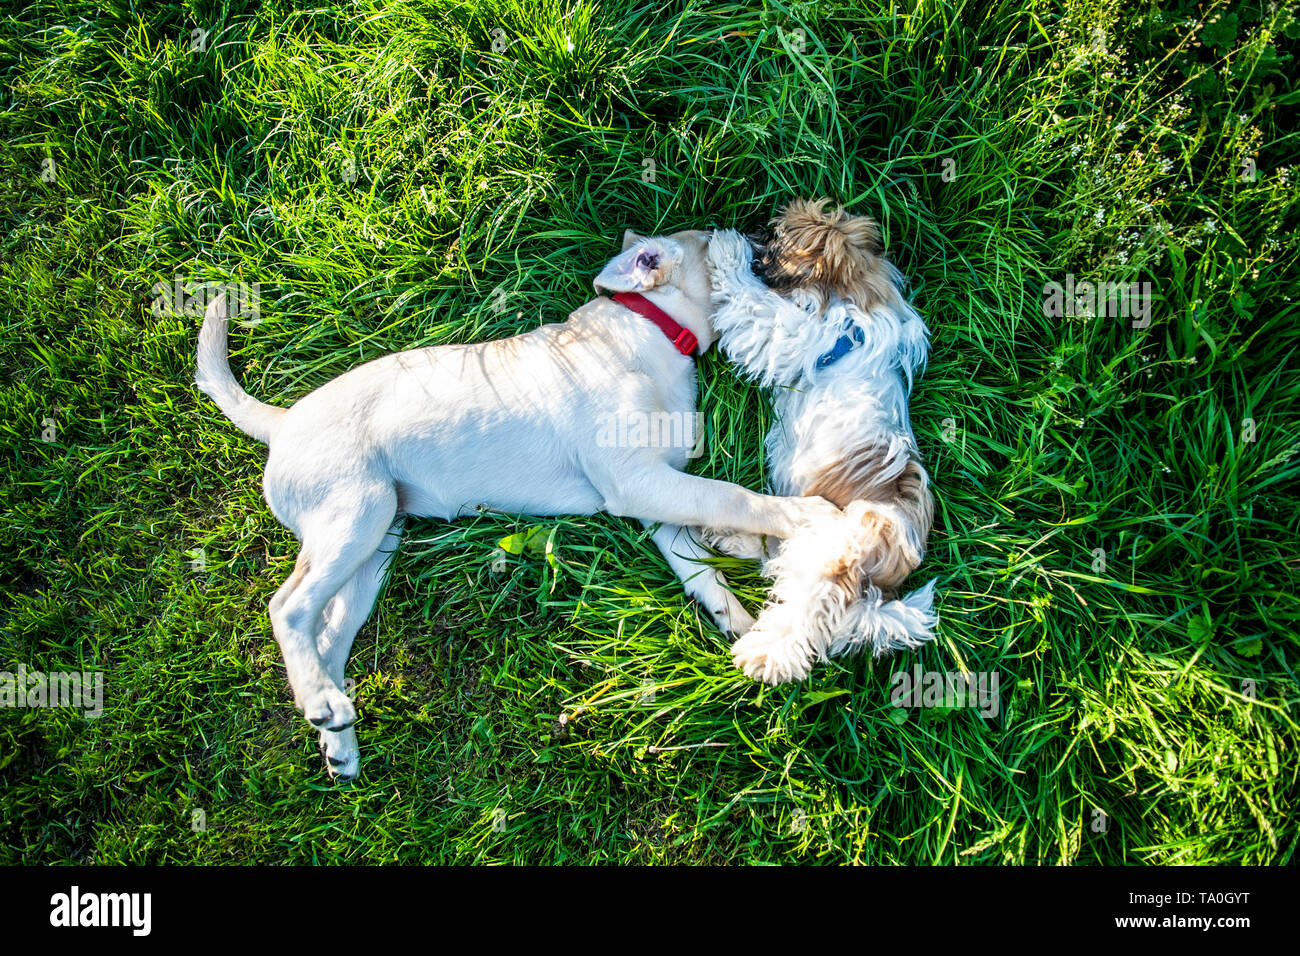 Two dogs laying and smelling each other in a green meadow. Stock Photo